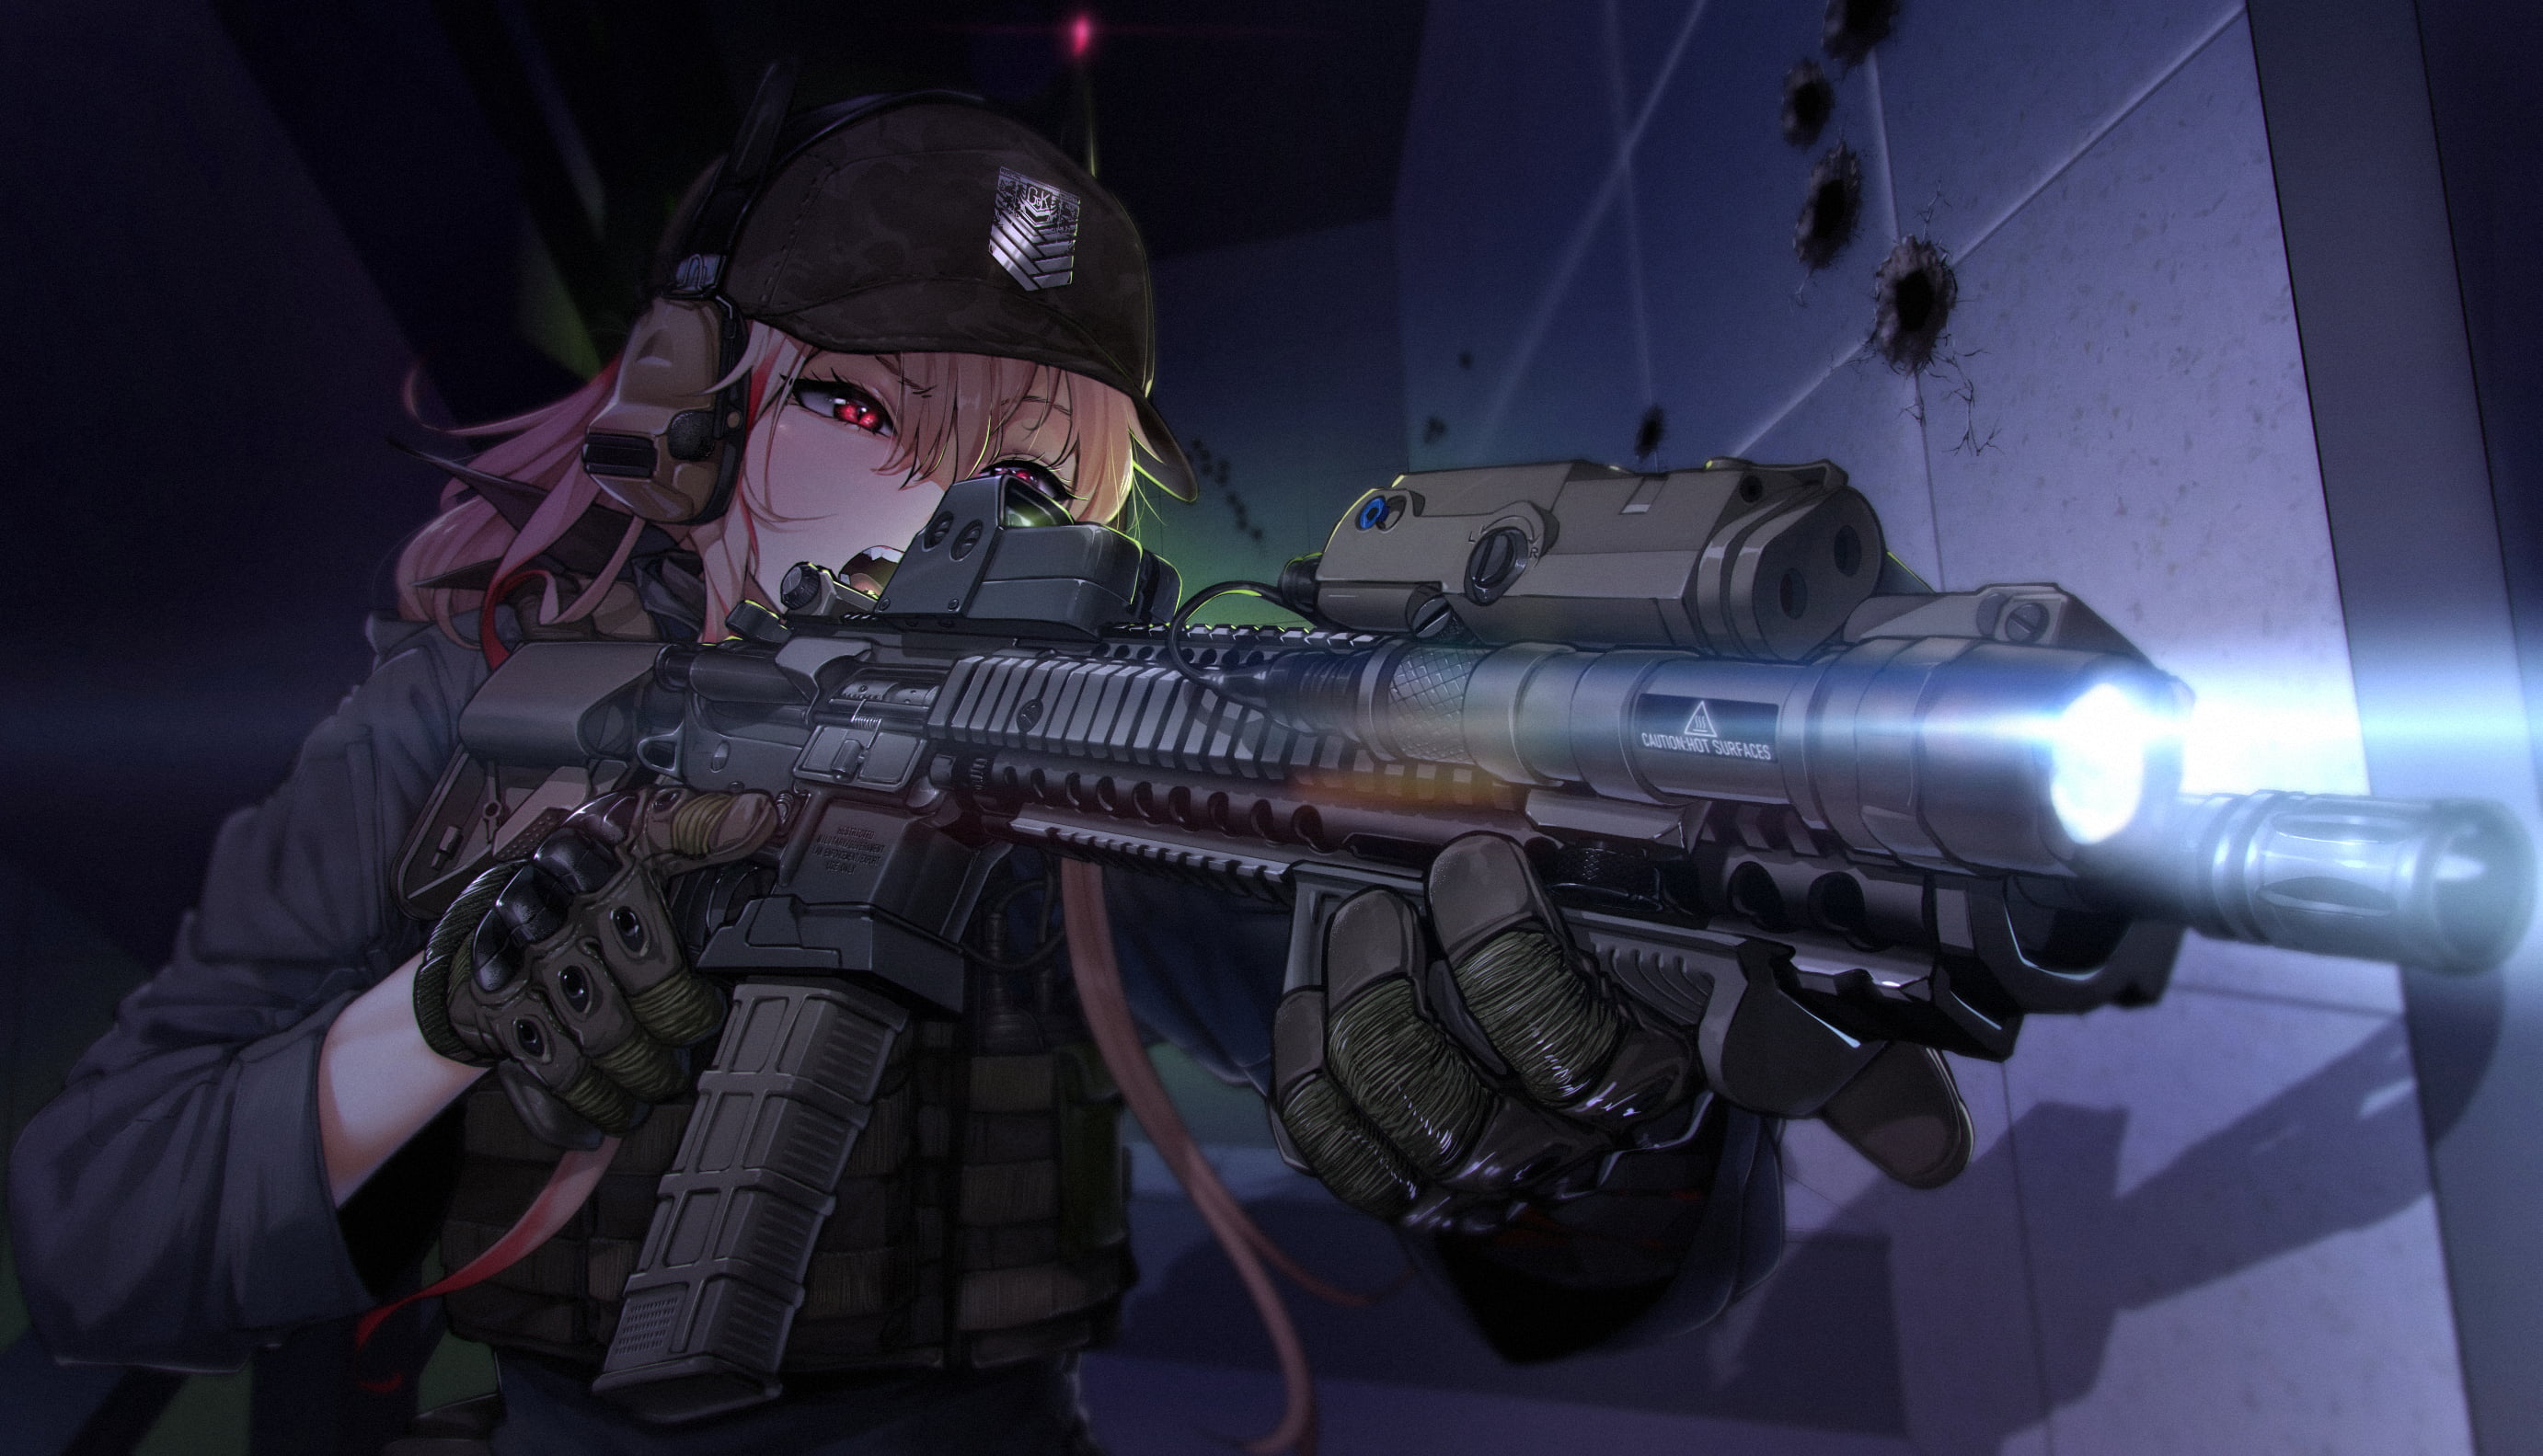 Anime Swat Wallpapers Wallpaper Cave 8666